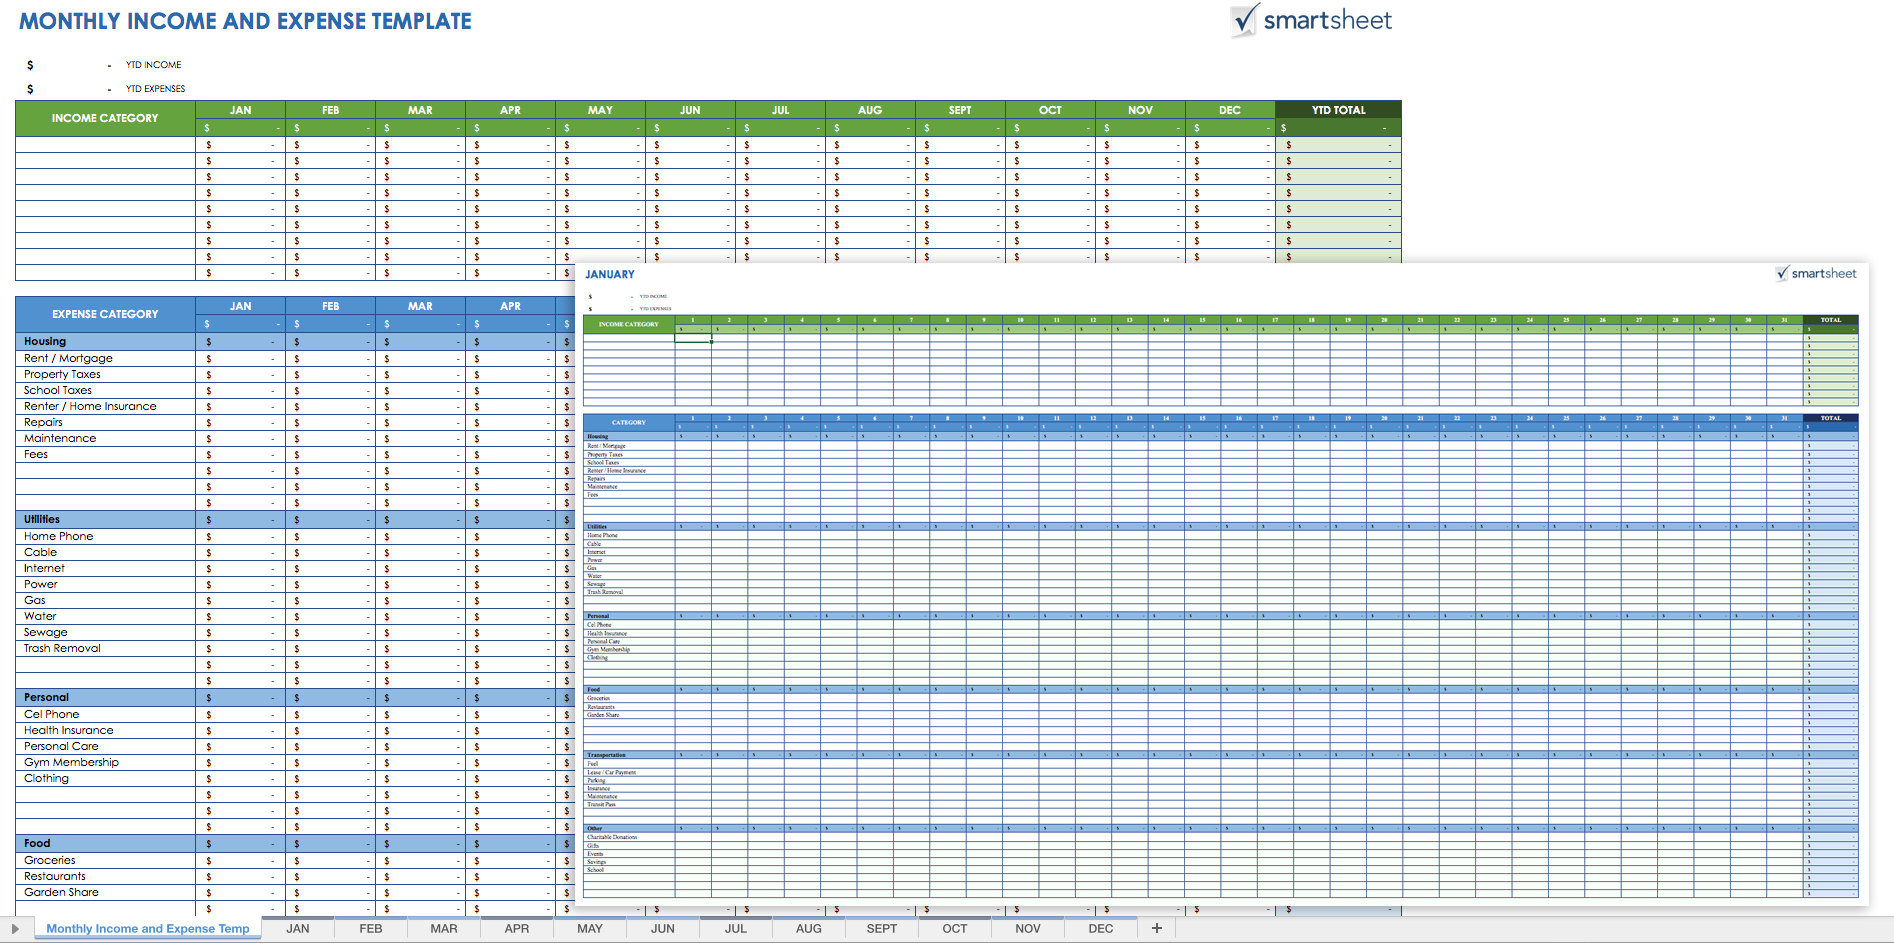 Building Cost Spreadsheet Template Australia Pertaining To Free Expense Report Templates Smartsheet Inside Cost Spreadsheet